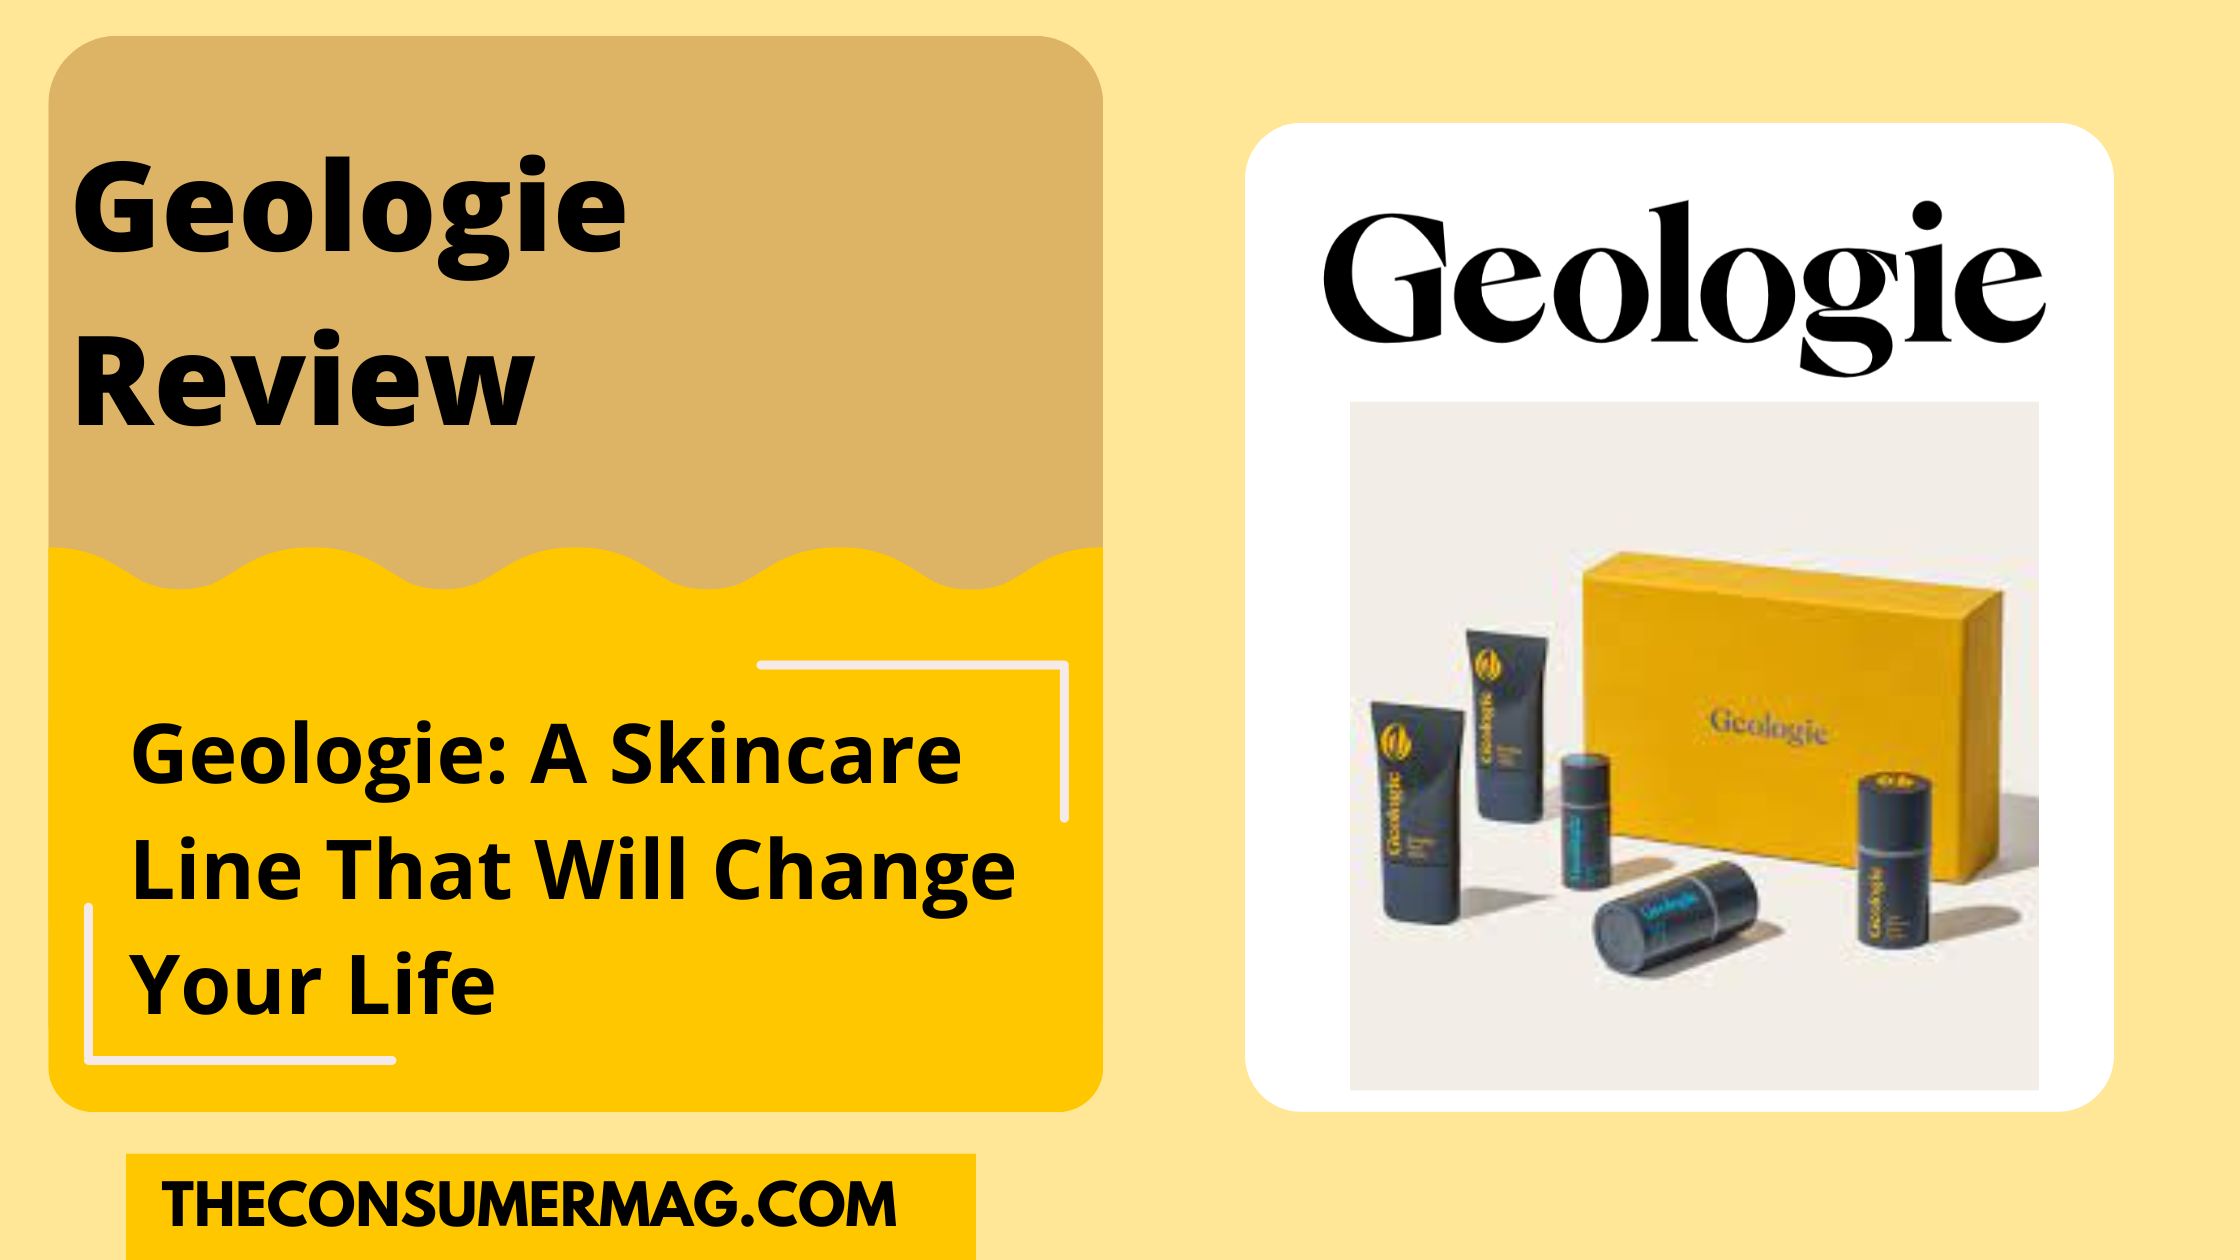 Geologie featured image